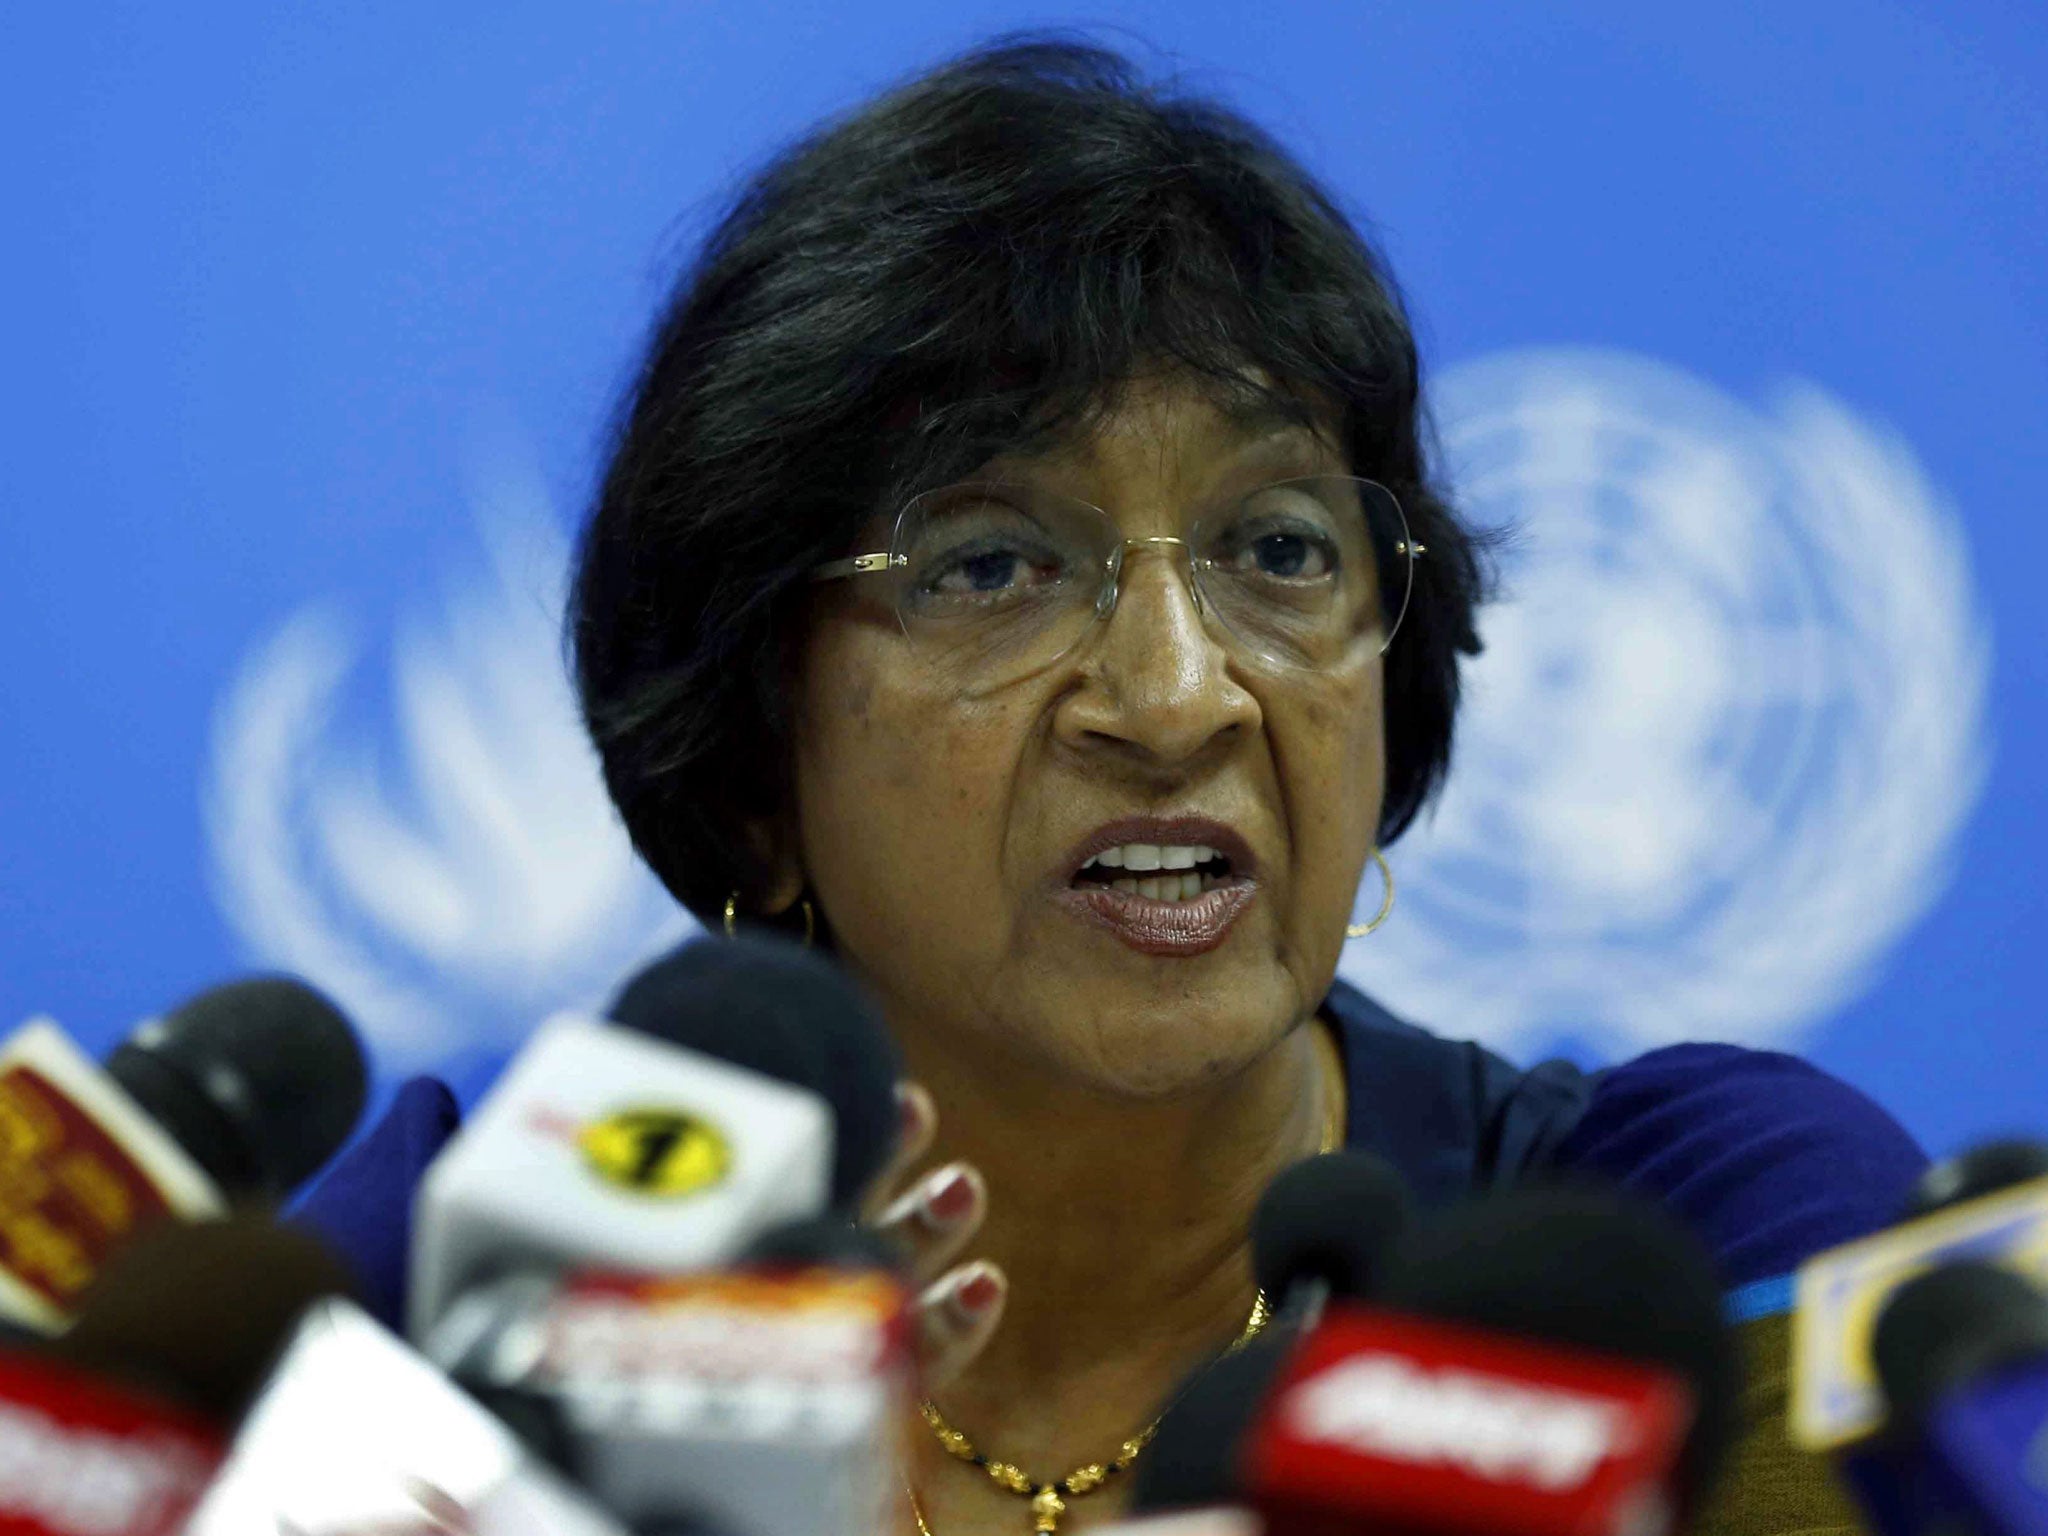 UN Human Rights Commissioner Navanethem Pillay speaks at a press conference before completing her visit in Colombo